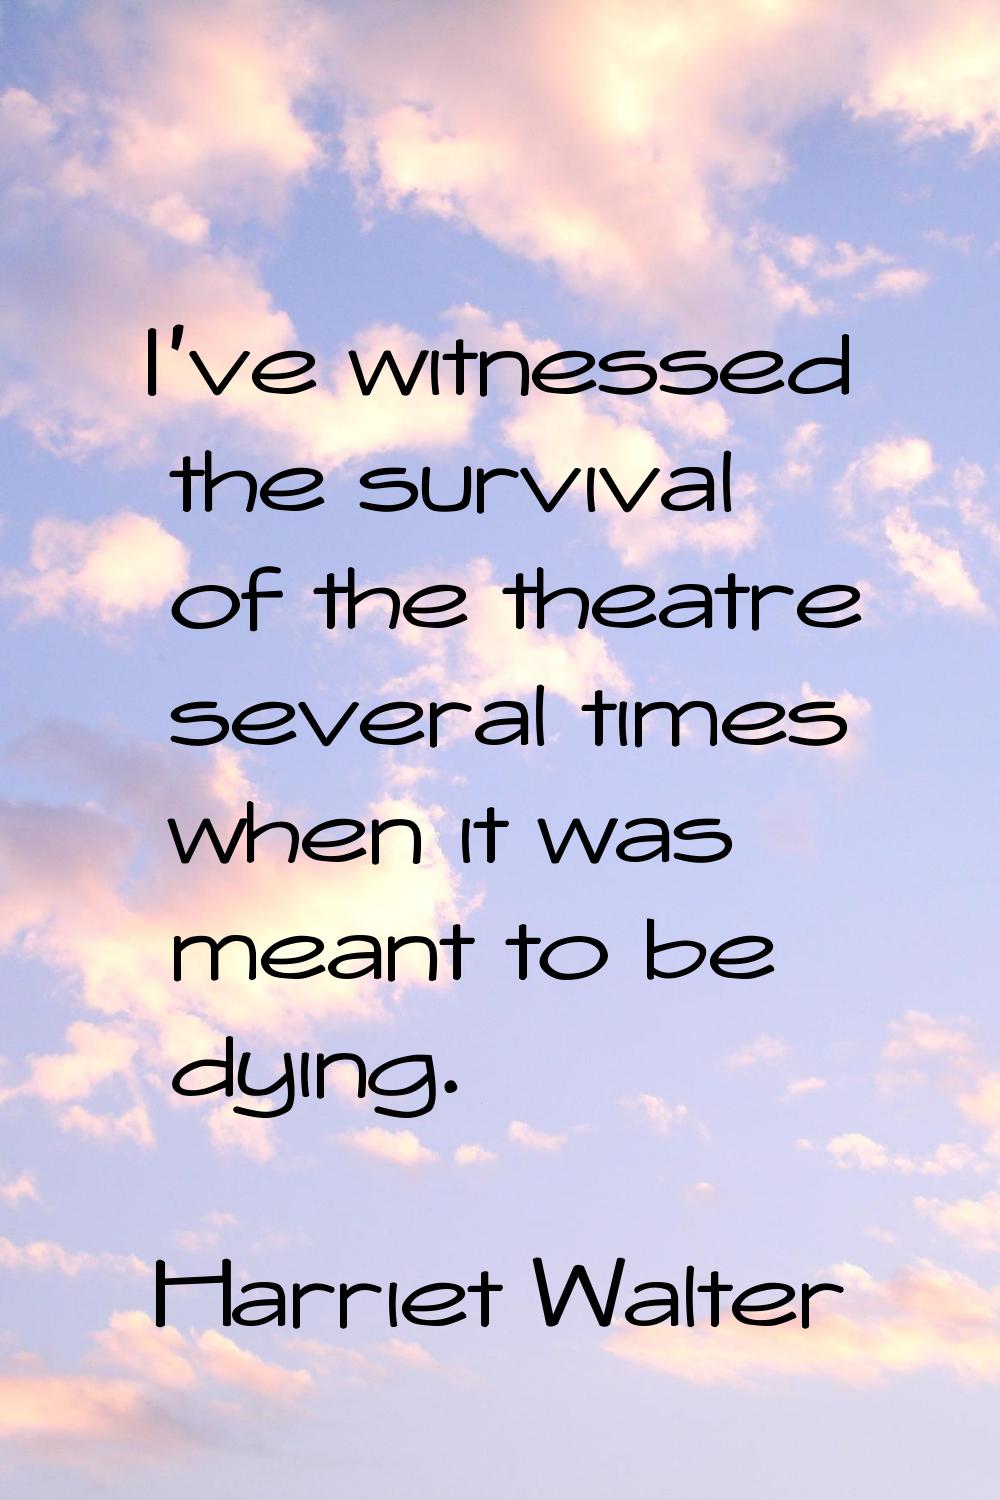 I've witnessed the survival of the theatre several times when it was meant to be dying.